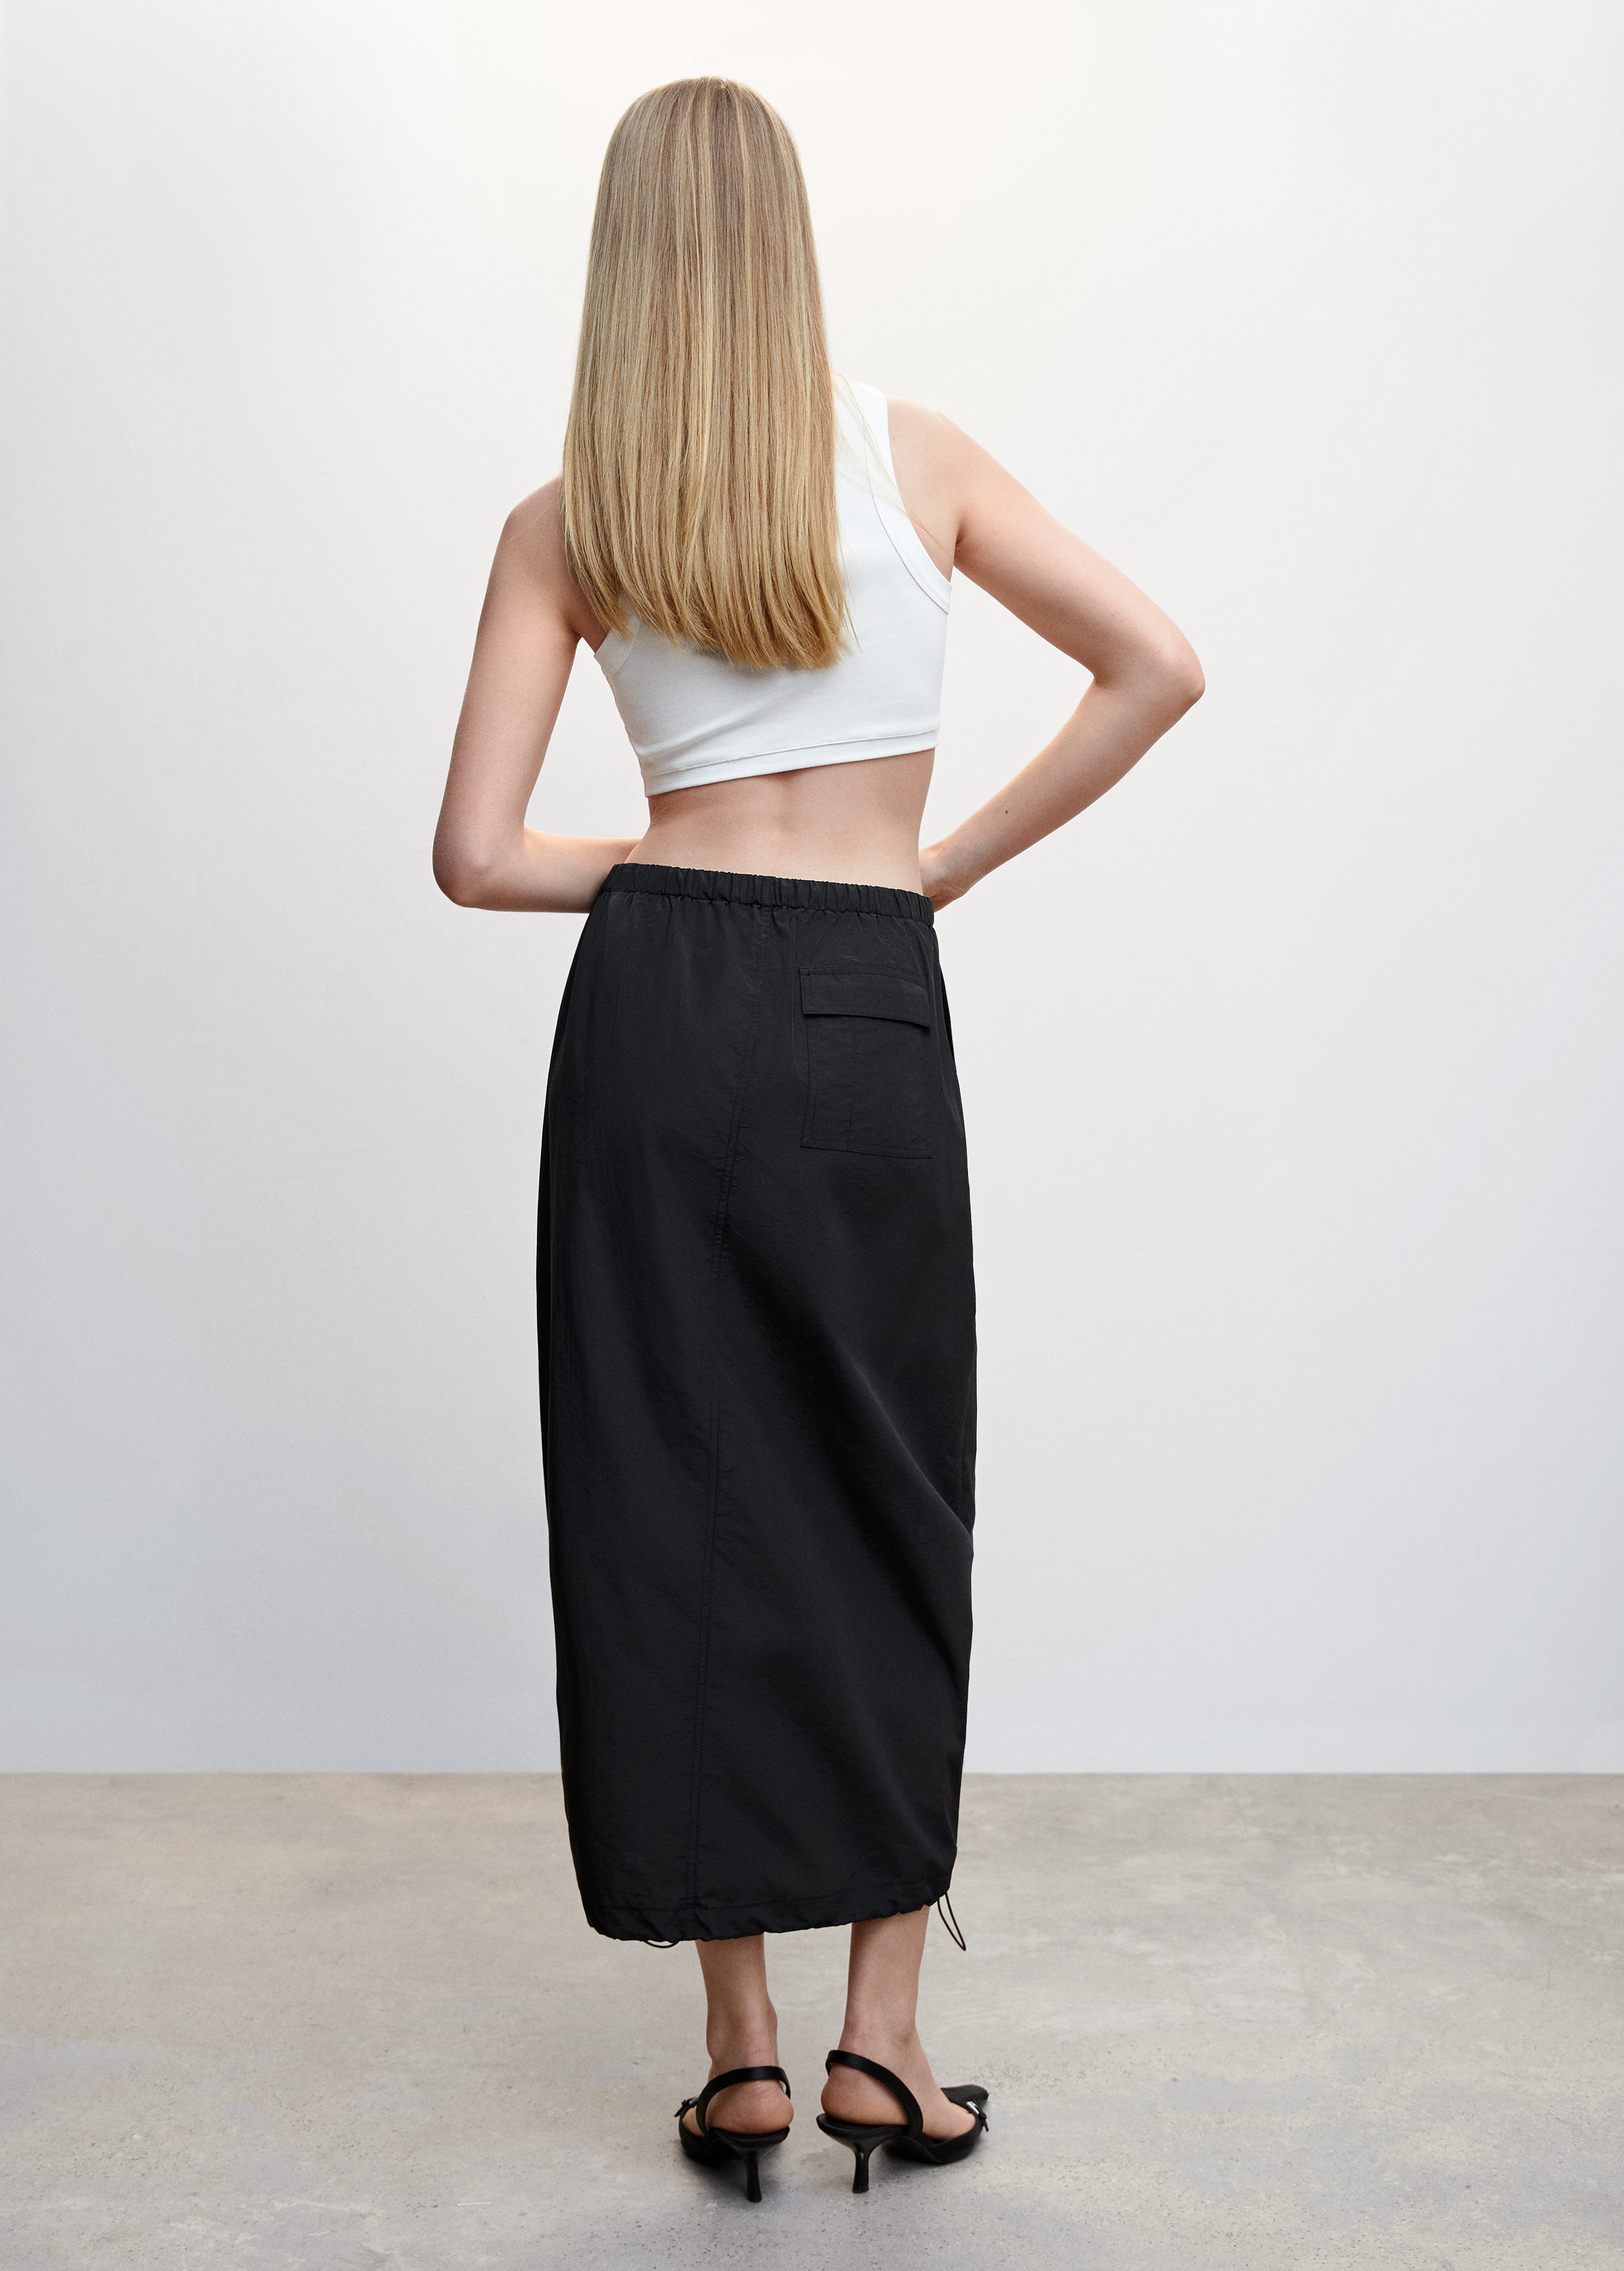 Parachute skirt - Reverse of the article